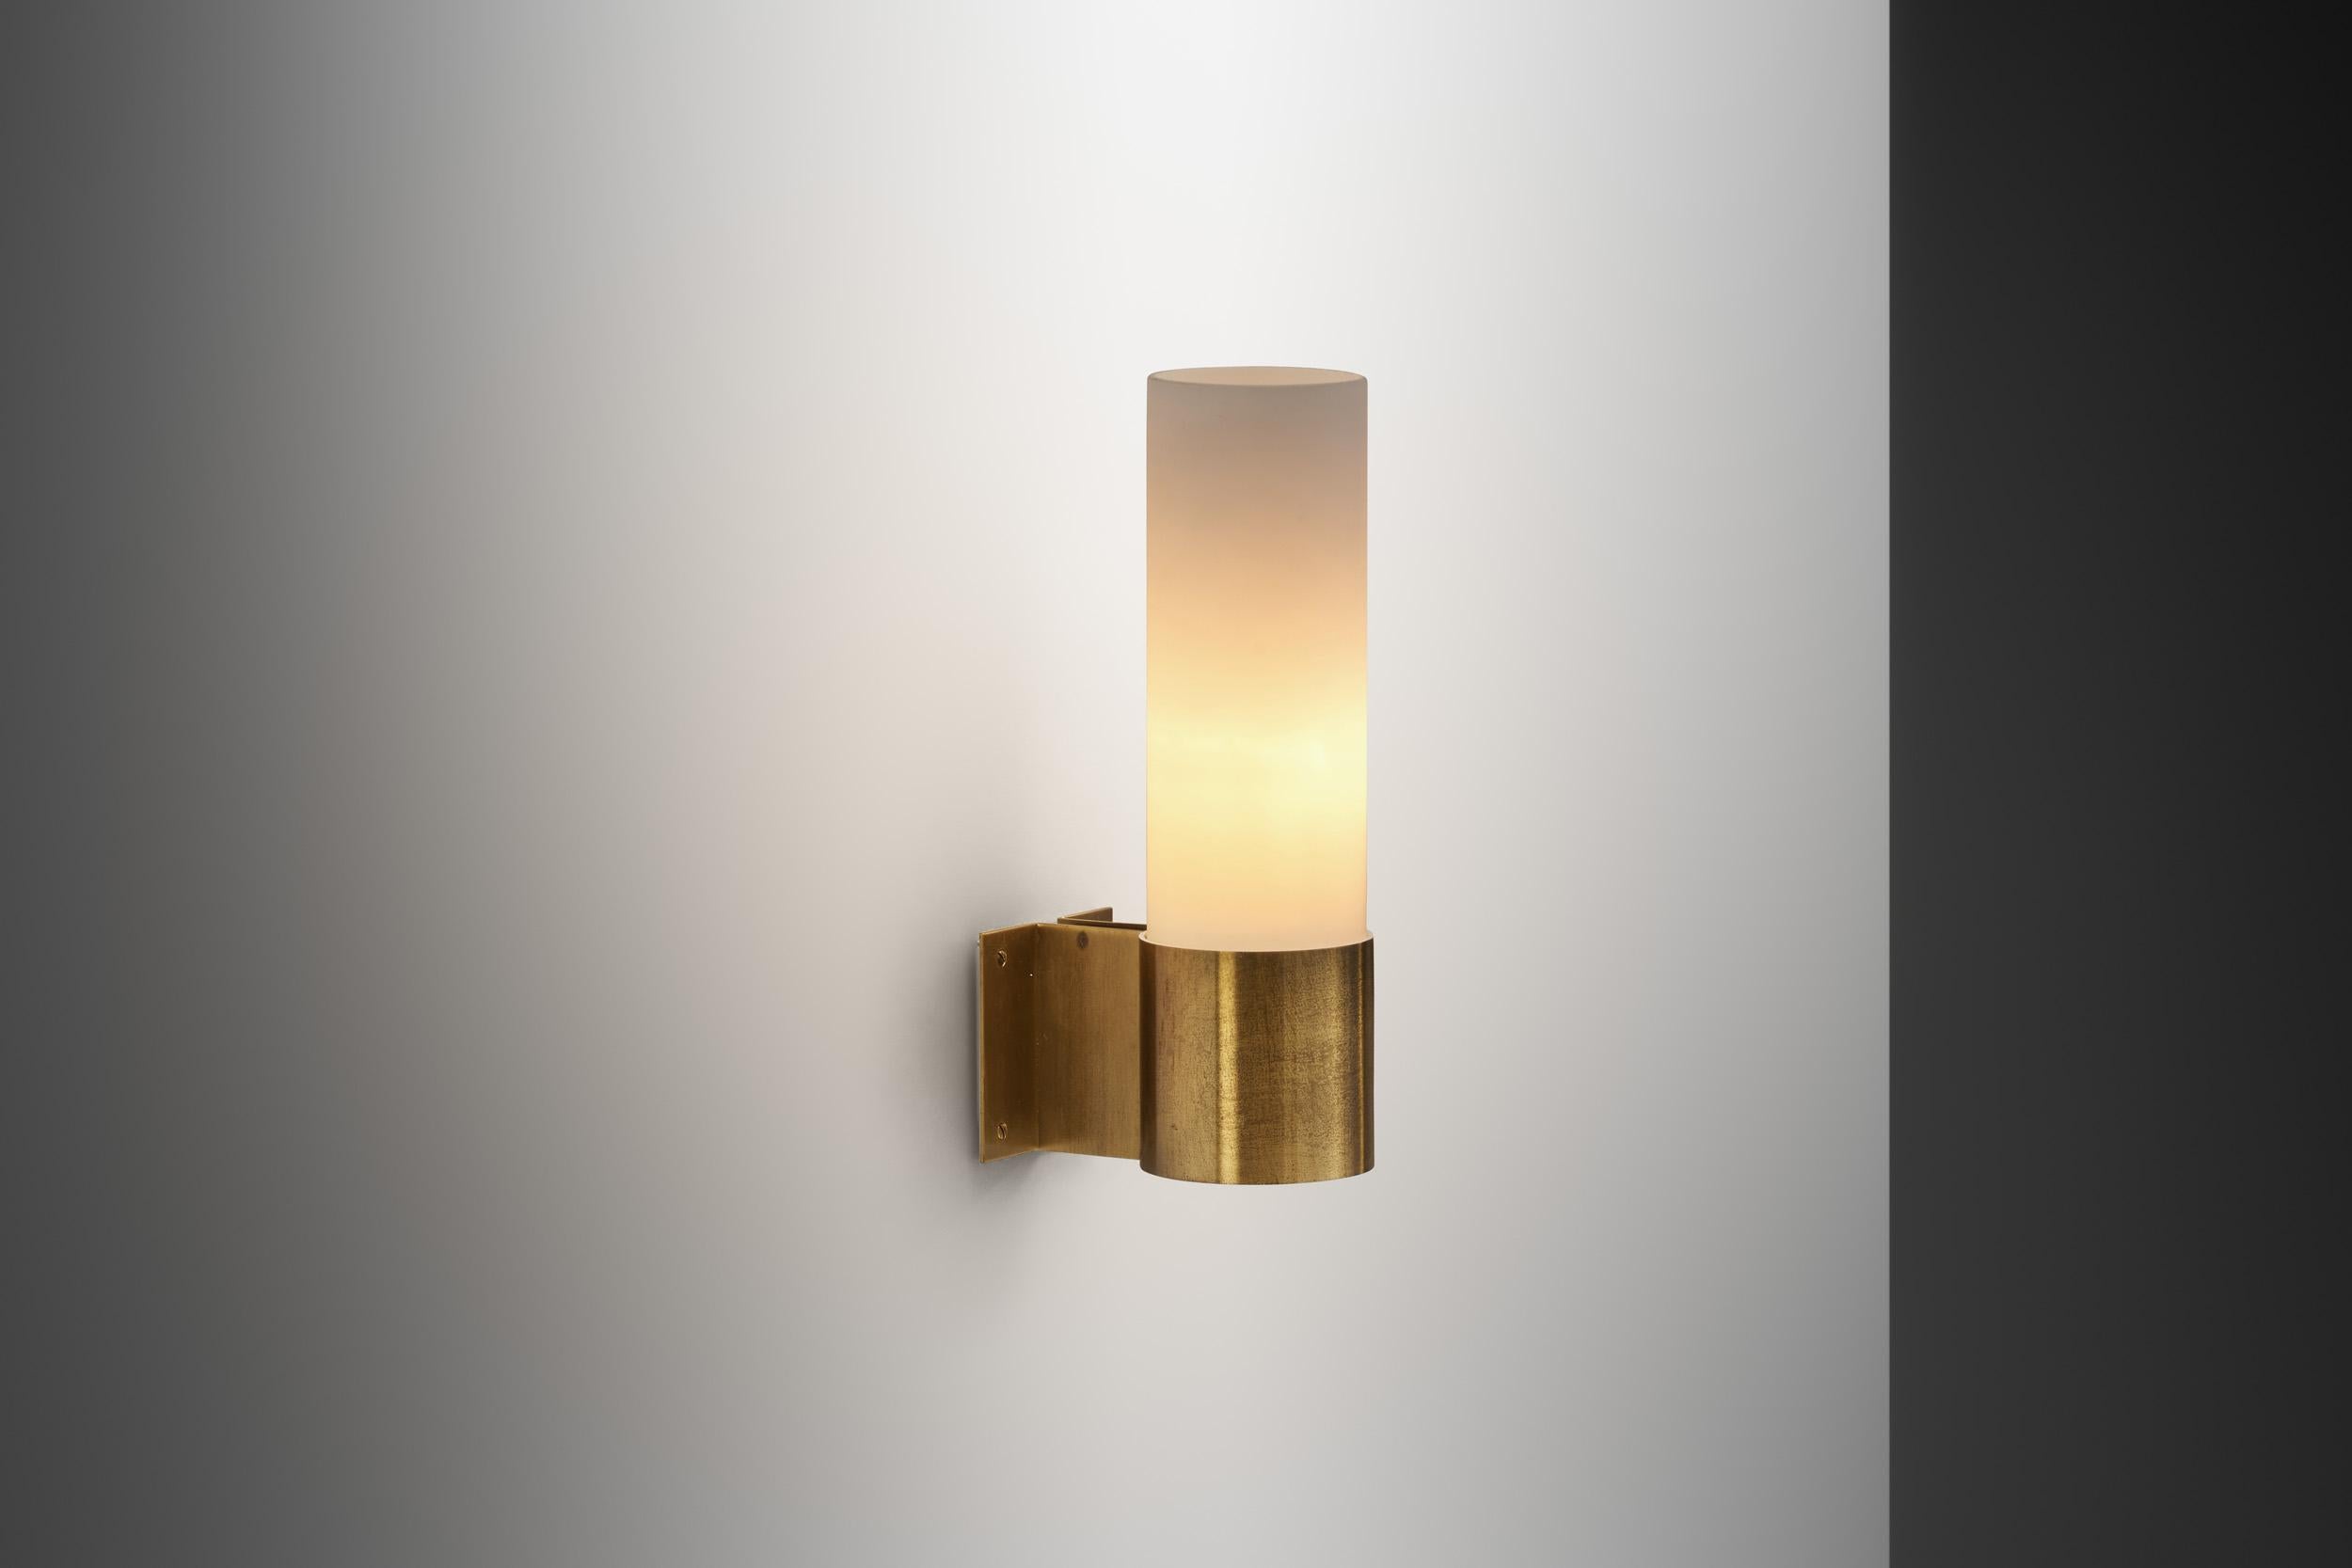 This wall lamp of Fog & Mørup production was designed by architect and designer Professor Jørgen Bo. Like the architect/designer’s other creations, the wall sconce is brilliant in its simplicity. A truely timeless piece.

Dating from the late 1960s,